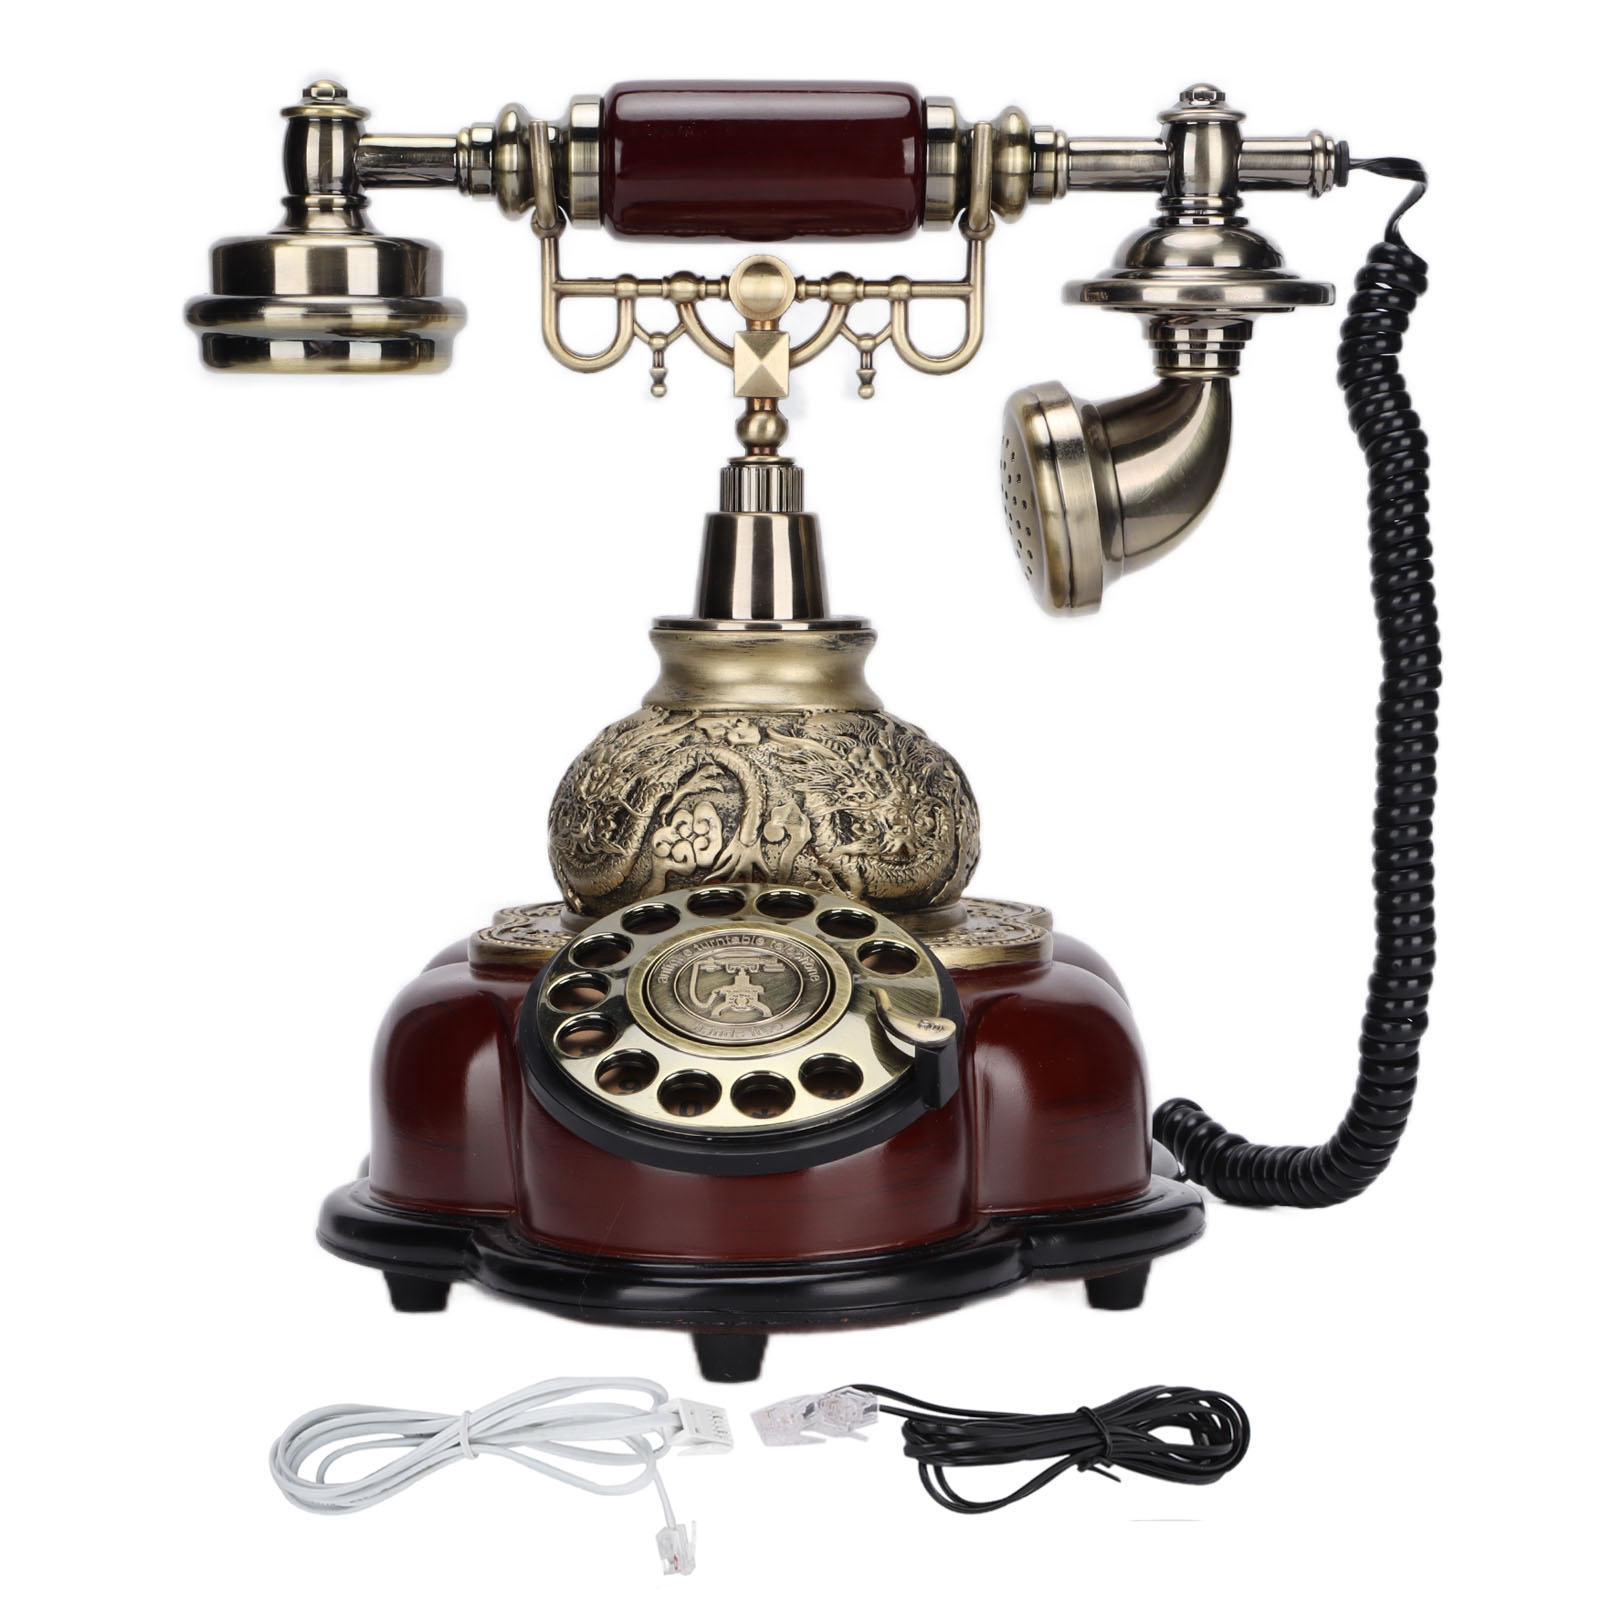 MS-9101 Vintage Retro Imitation Antique Telephone for Home Office Use Multi-Angle Smart Screen FSK and DTMF Caller ID Golden Removable Bracket Telephone 